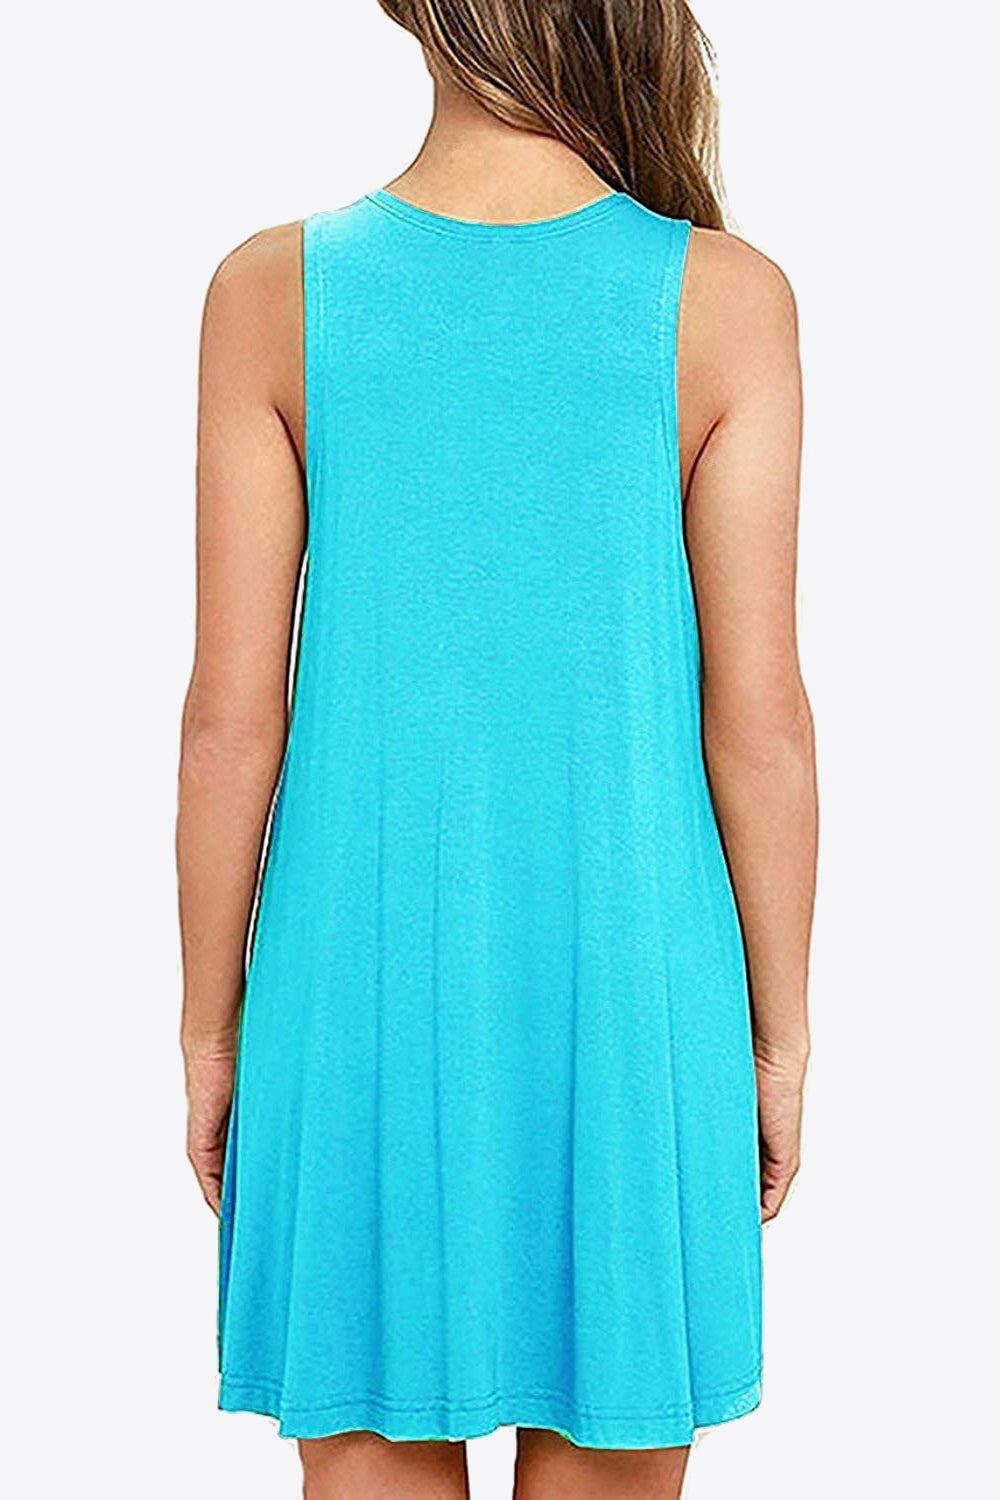 Turquoise Full Size Round Neck Sleeveless Dress with Pockets Sentient Beauty Fashions Dresses